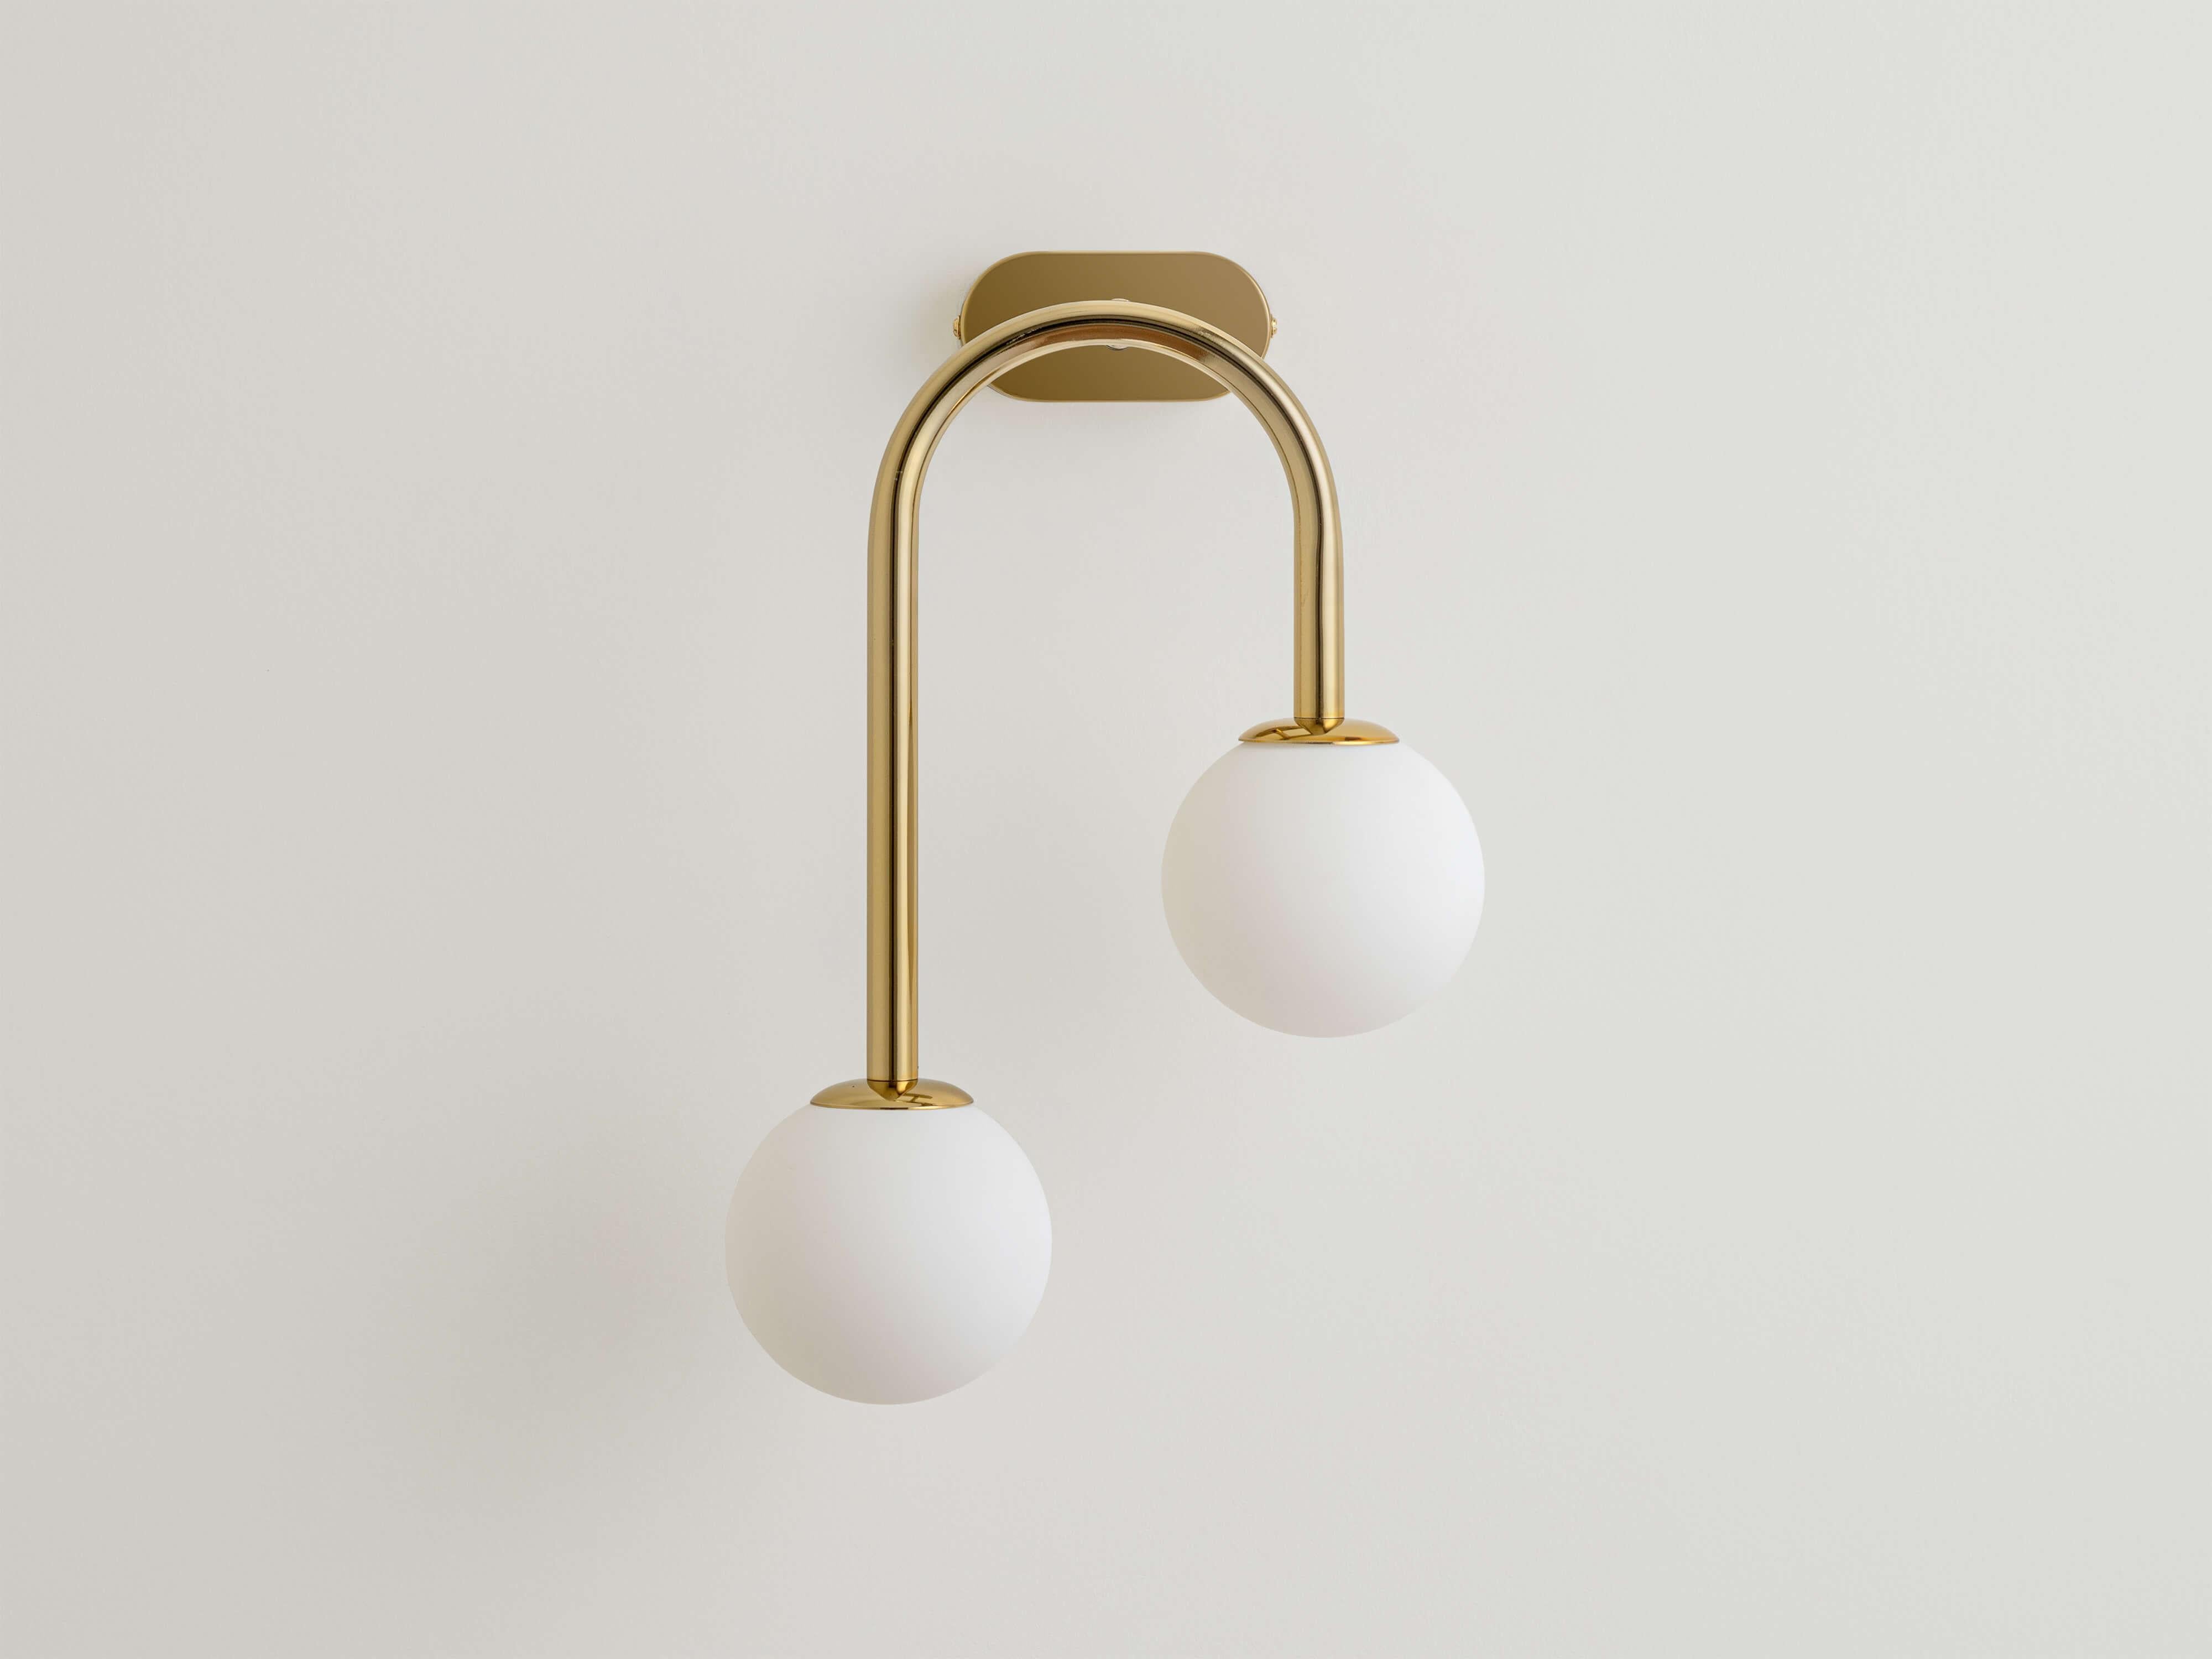 Chinese Brass Drop Curve Wall Light